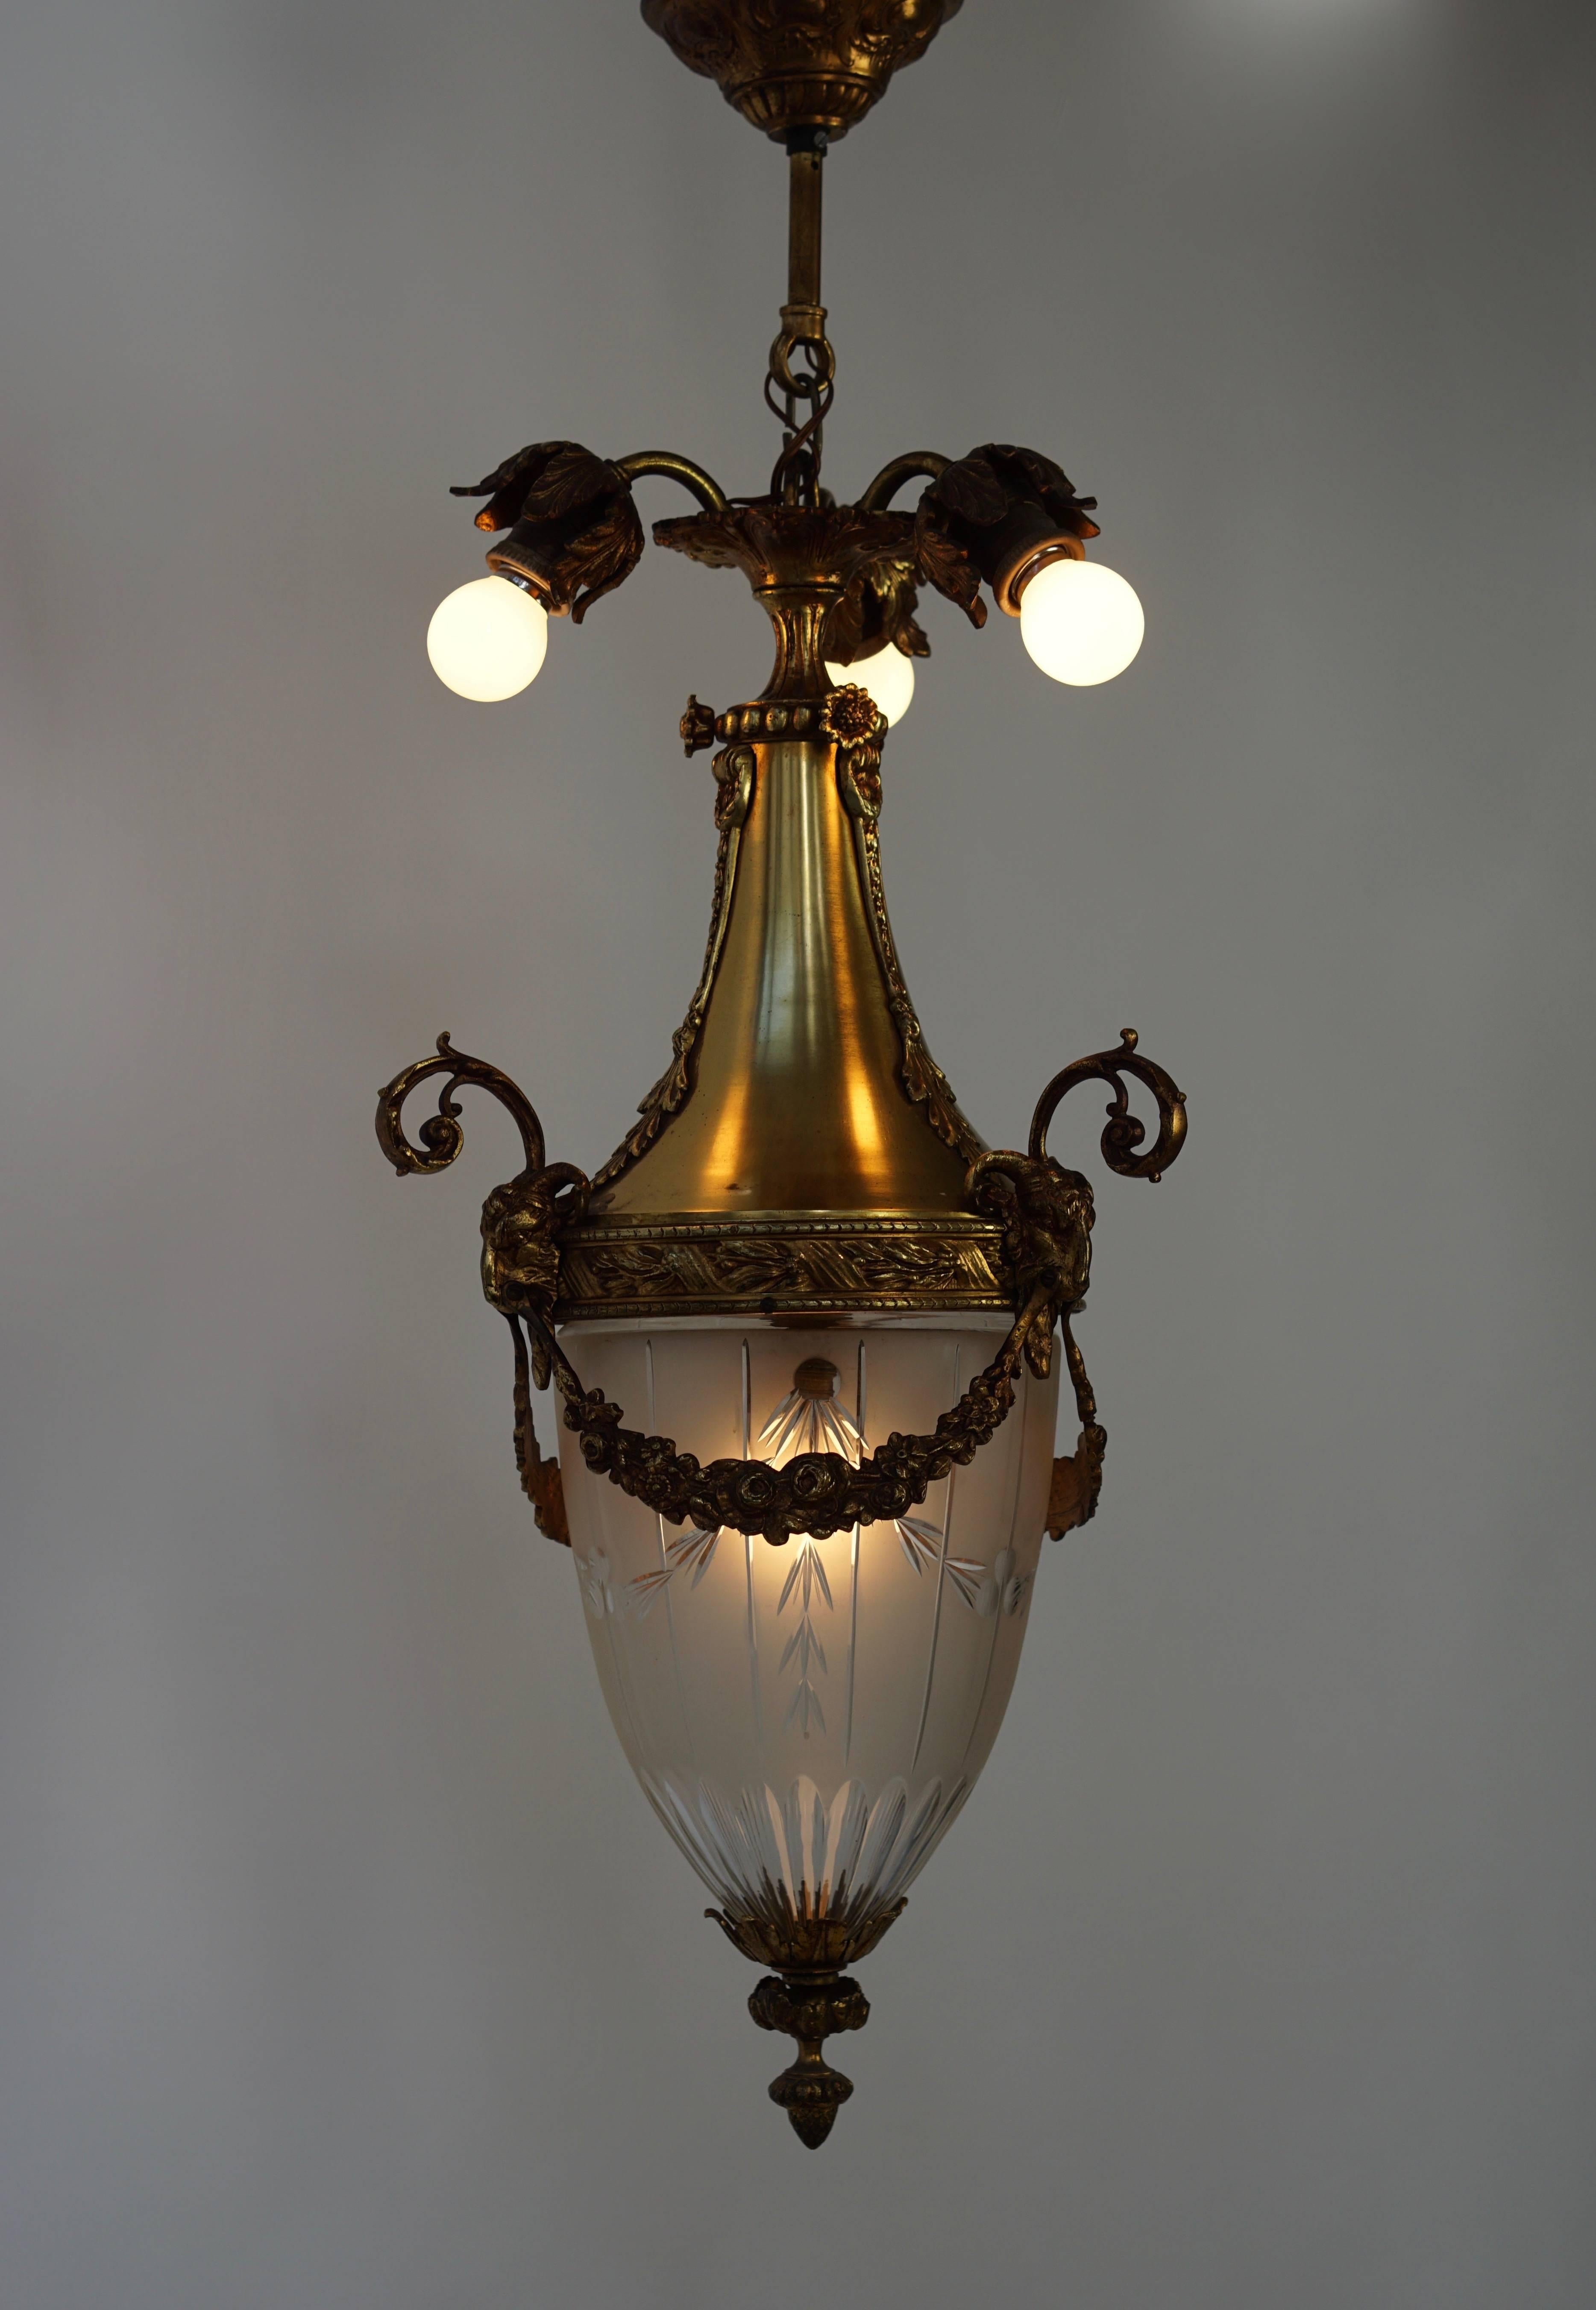 A wonderful lantern from the Art Deco period made of solid brass.
Hollywood Regency style.
Measure: Total height with chain is 85 cm.
Height lantern 65 cm.
Diameter 30 cm.